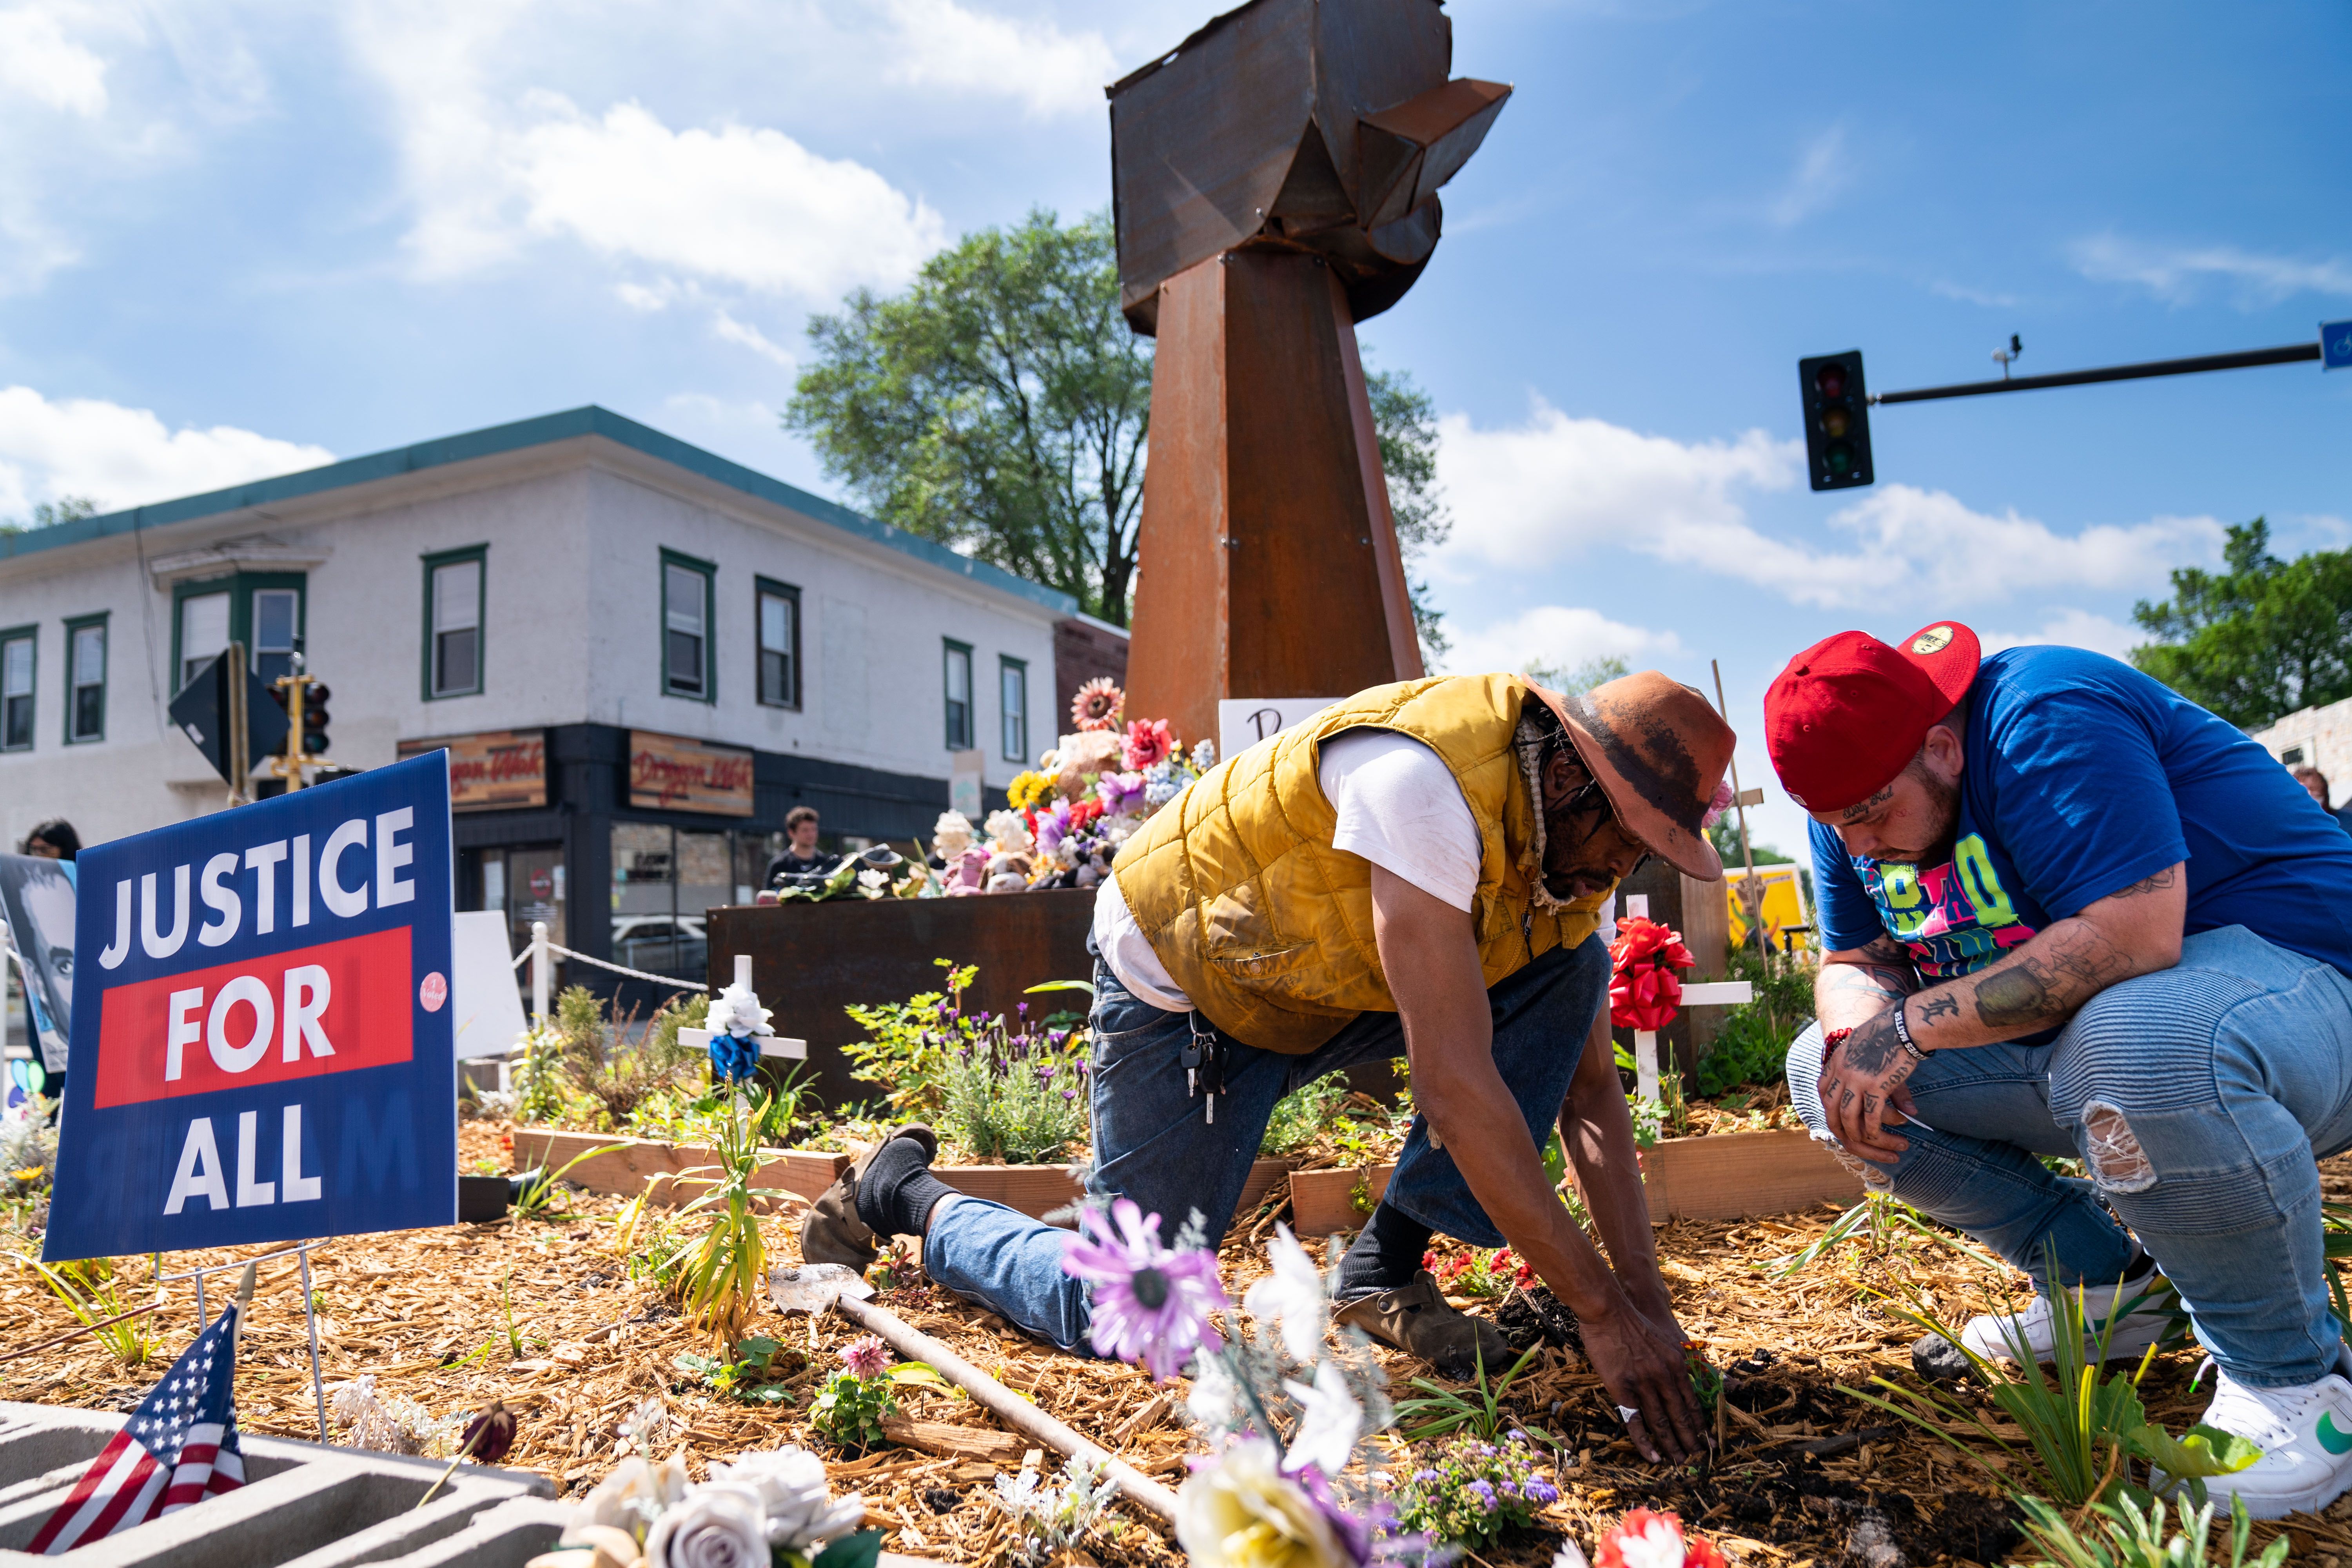 Jay Webb and Damik Wright, the brother of Daunte Wright, plant flowers near the fist sculpture in the center of George Floyd Memorial Square Square on Tuesday, May 25, 2021 in Minneapolis